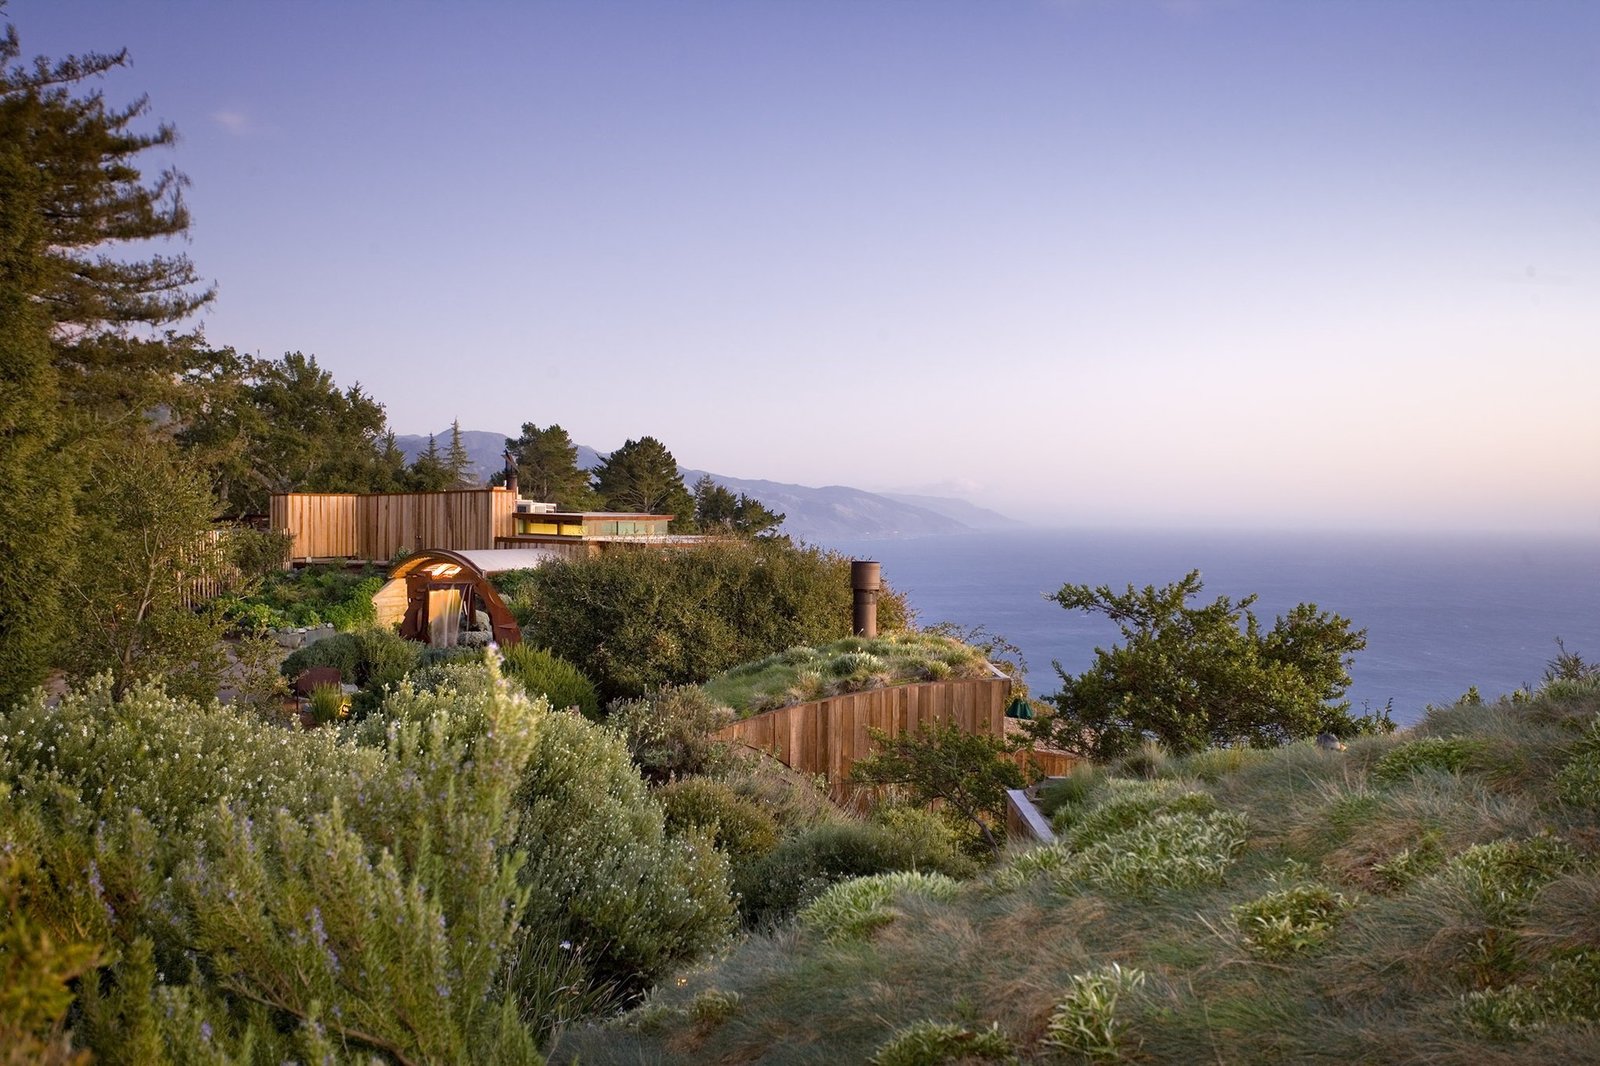 How an Unsung Architect Gave Big Sur Its Look